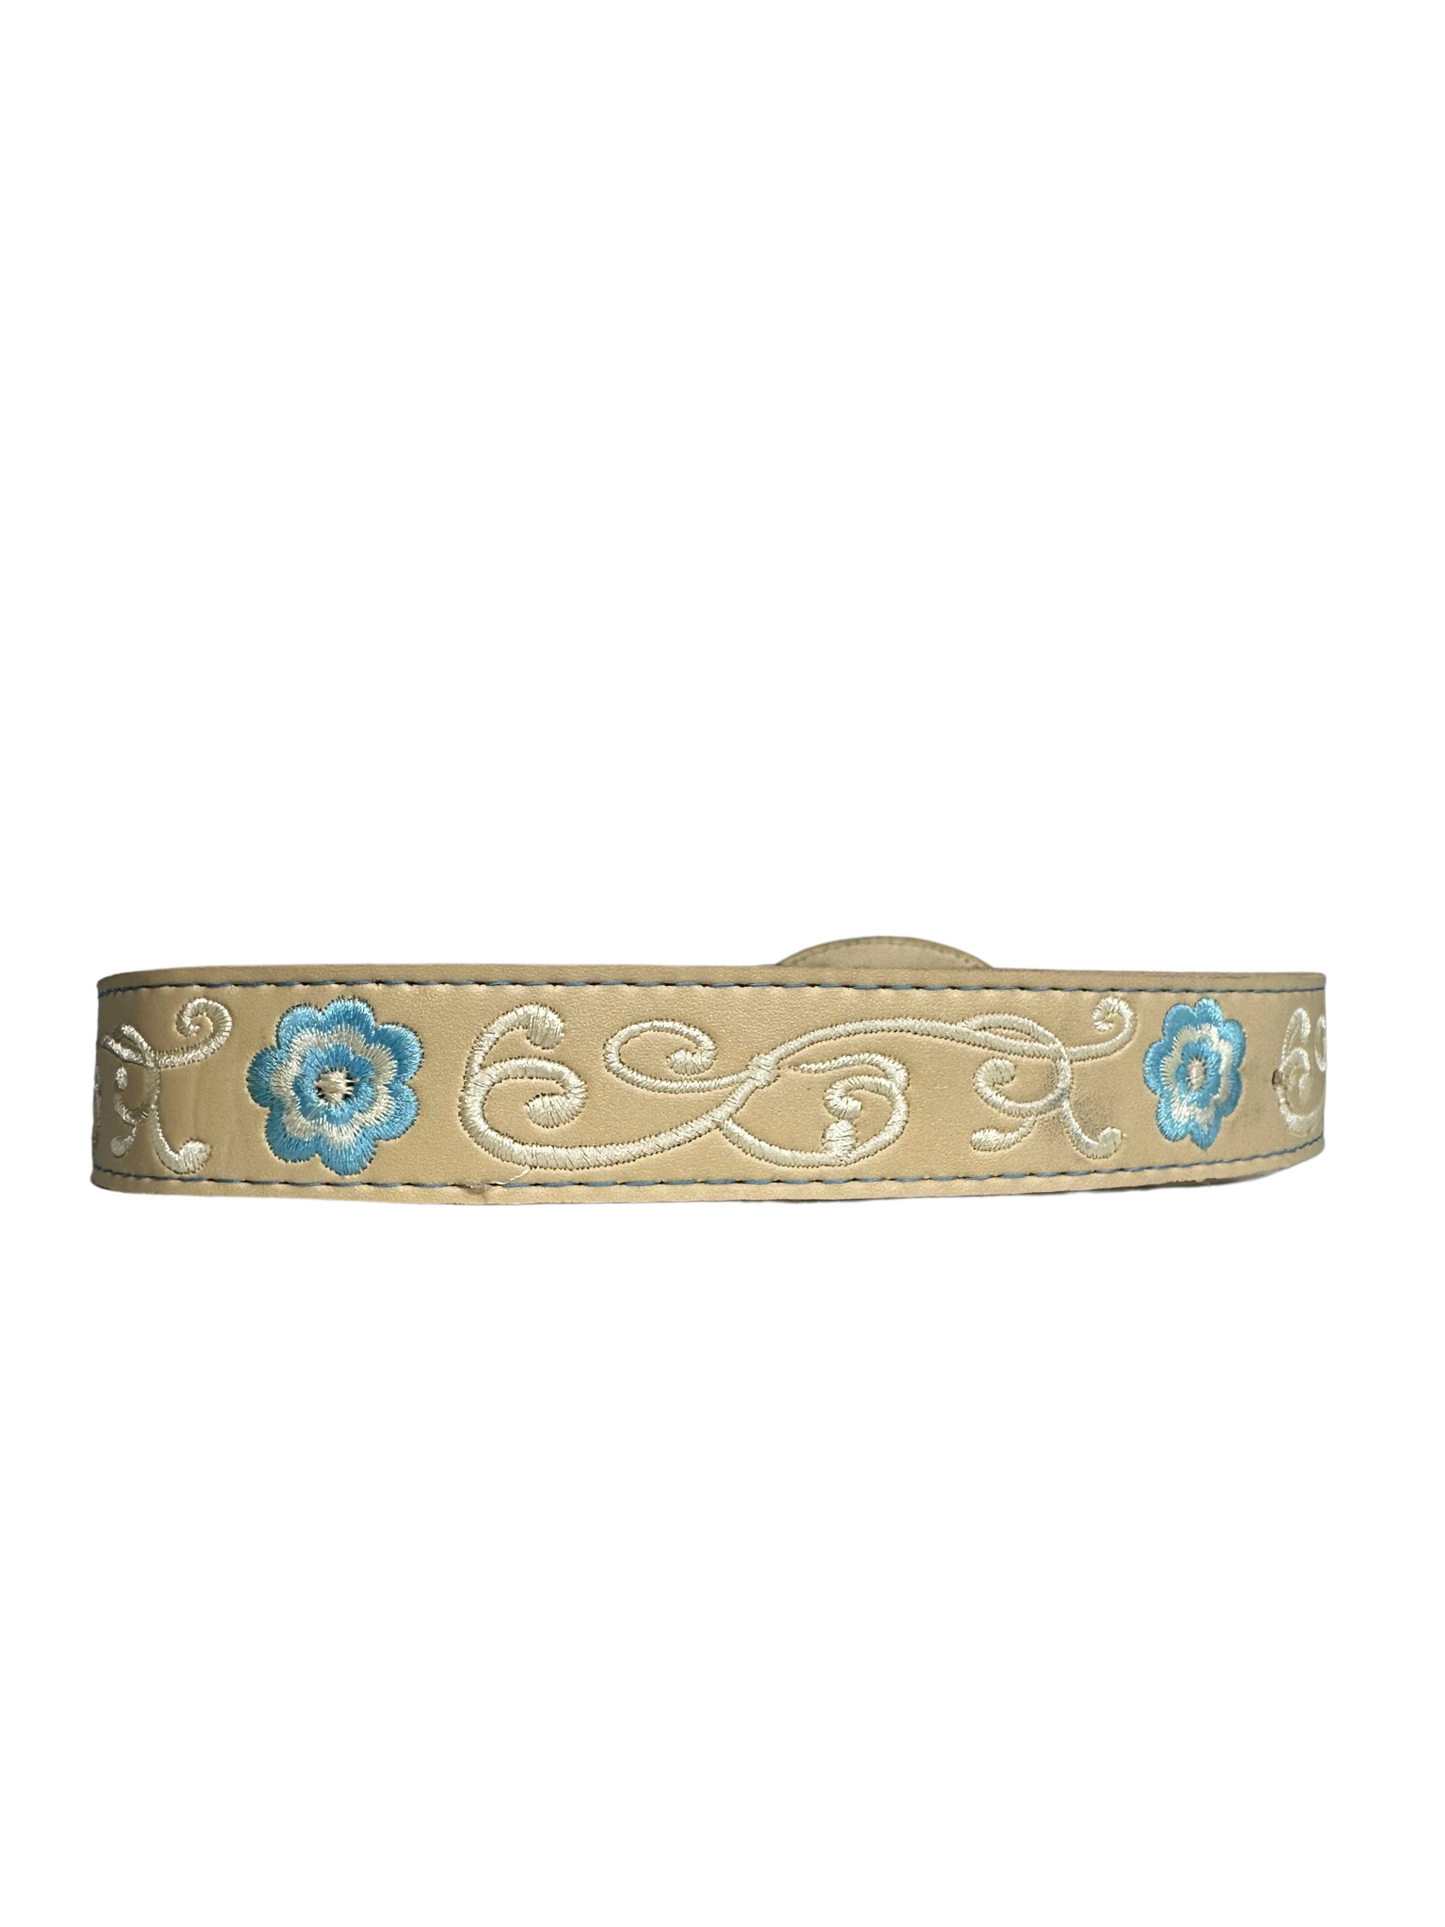 Girl's Blue Floral Embroided Leather Belt